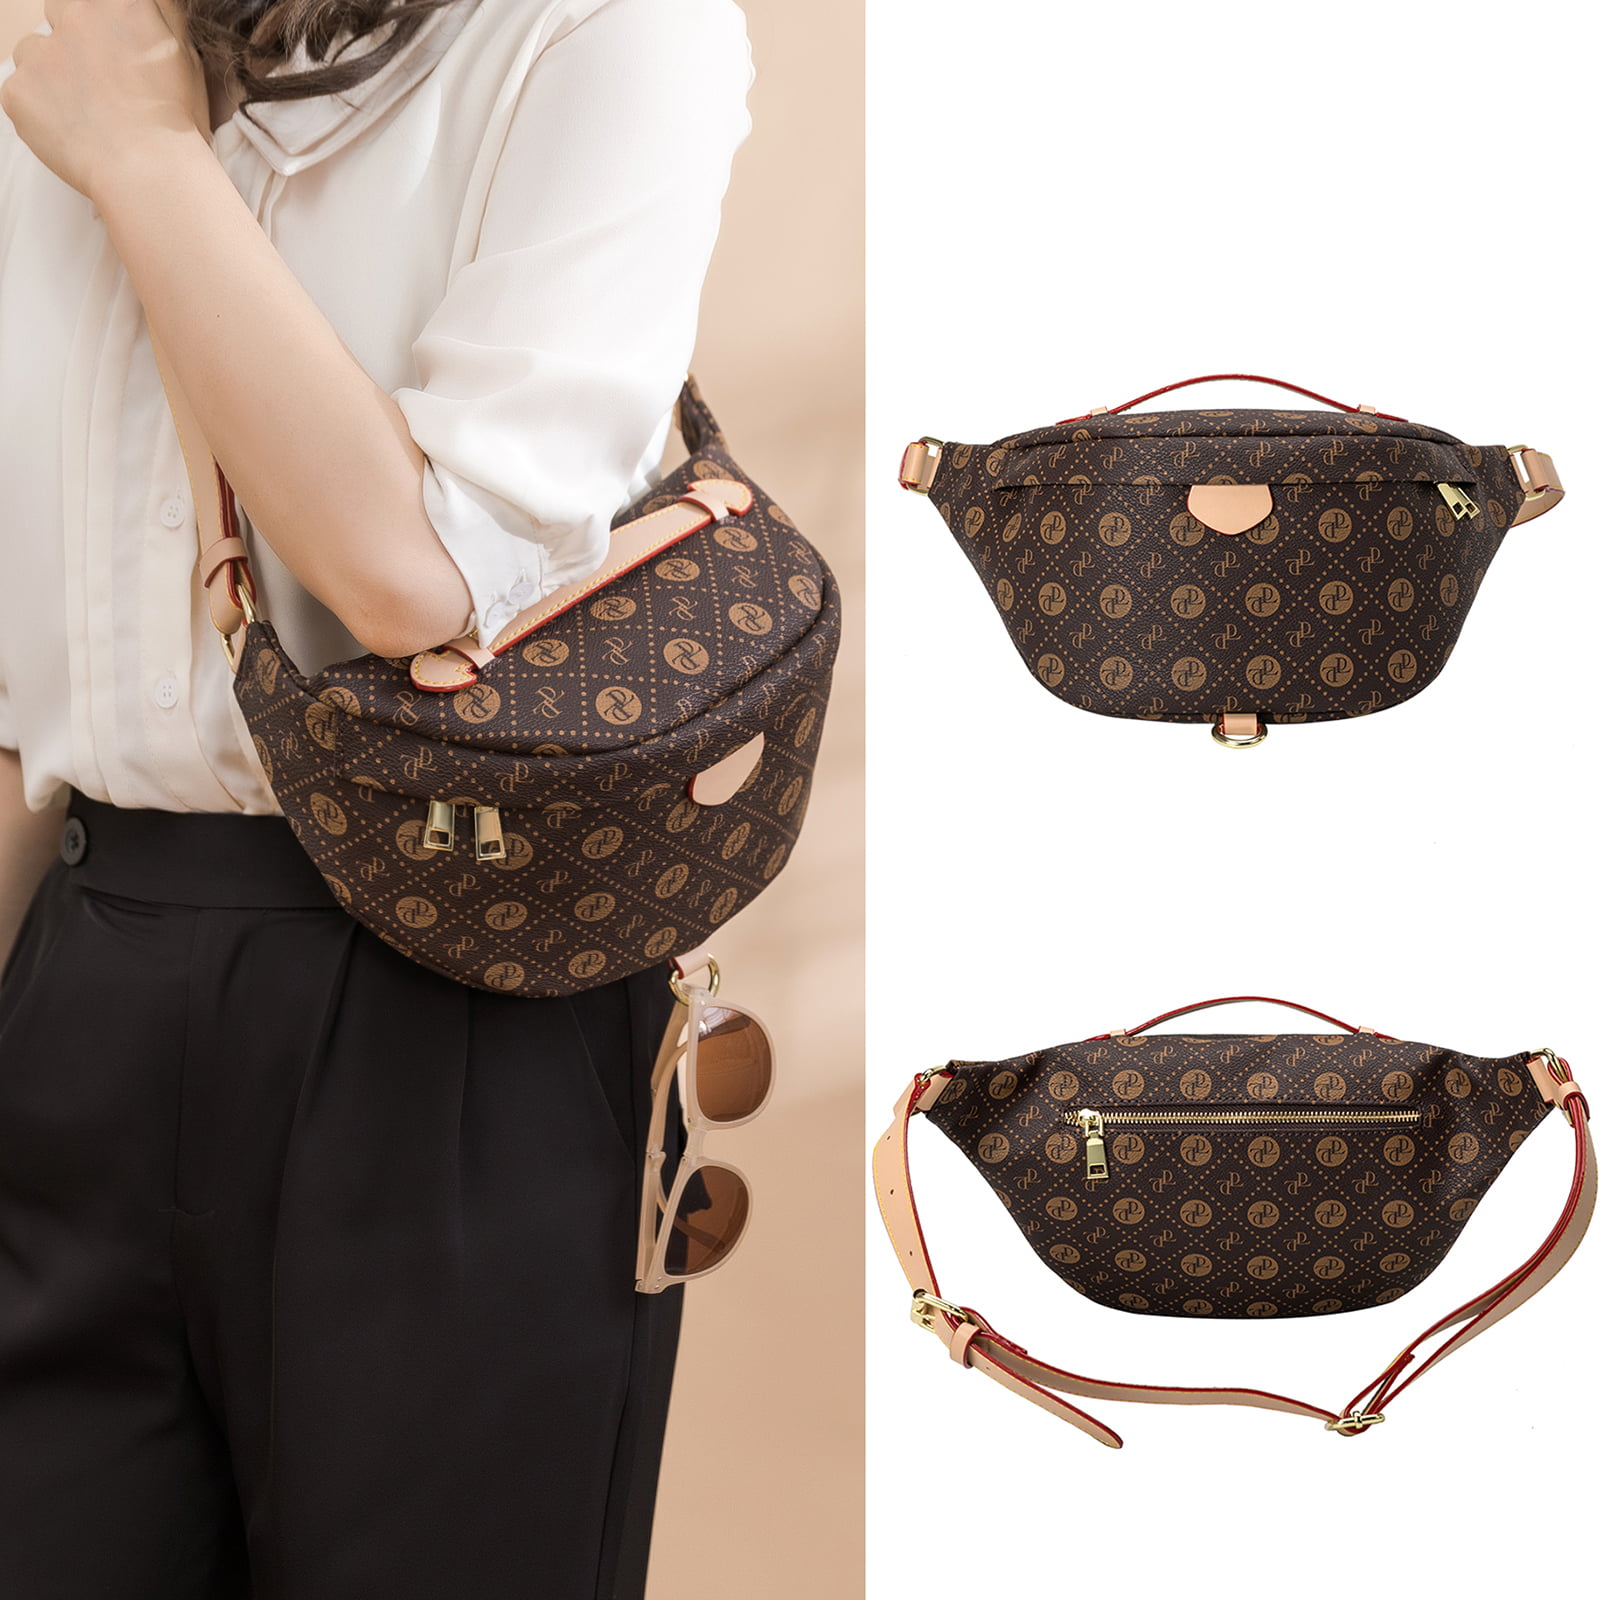 Zsoznqaky Triangle Black Checkered Fanny Pack Designer Inspired Fanny Pack for Women Checkered Crossover Bag Checkered Sling Bag Leather Fanny Pouch